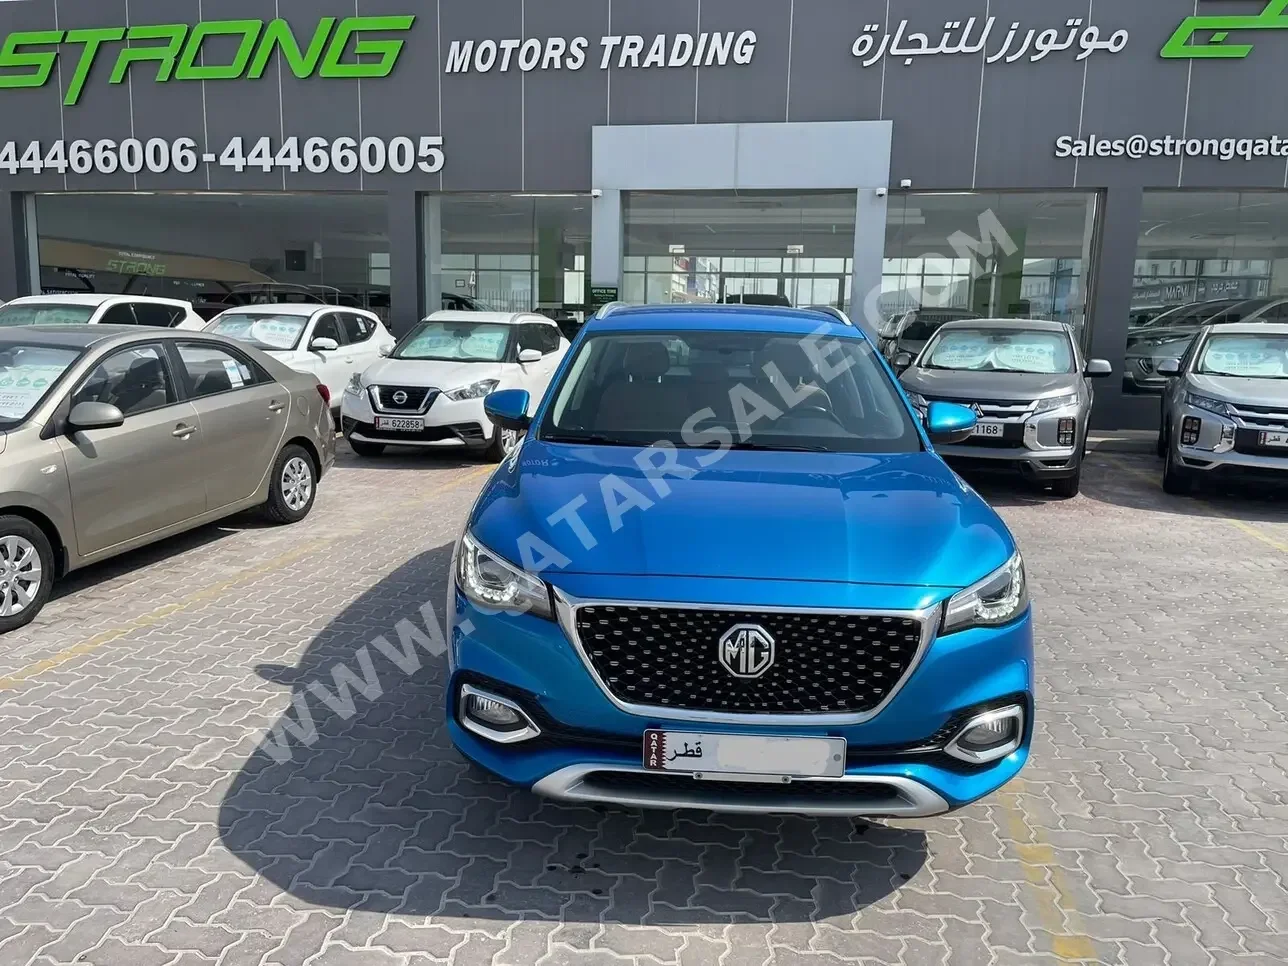 MG  HS  2021  Automatic  39,000 Km  4 Cylinder  Four Wheel Drive (4WD)  SUV  Blue  With Warranty